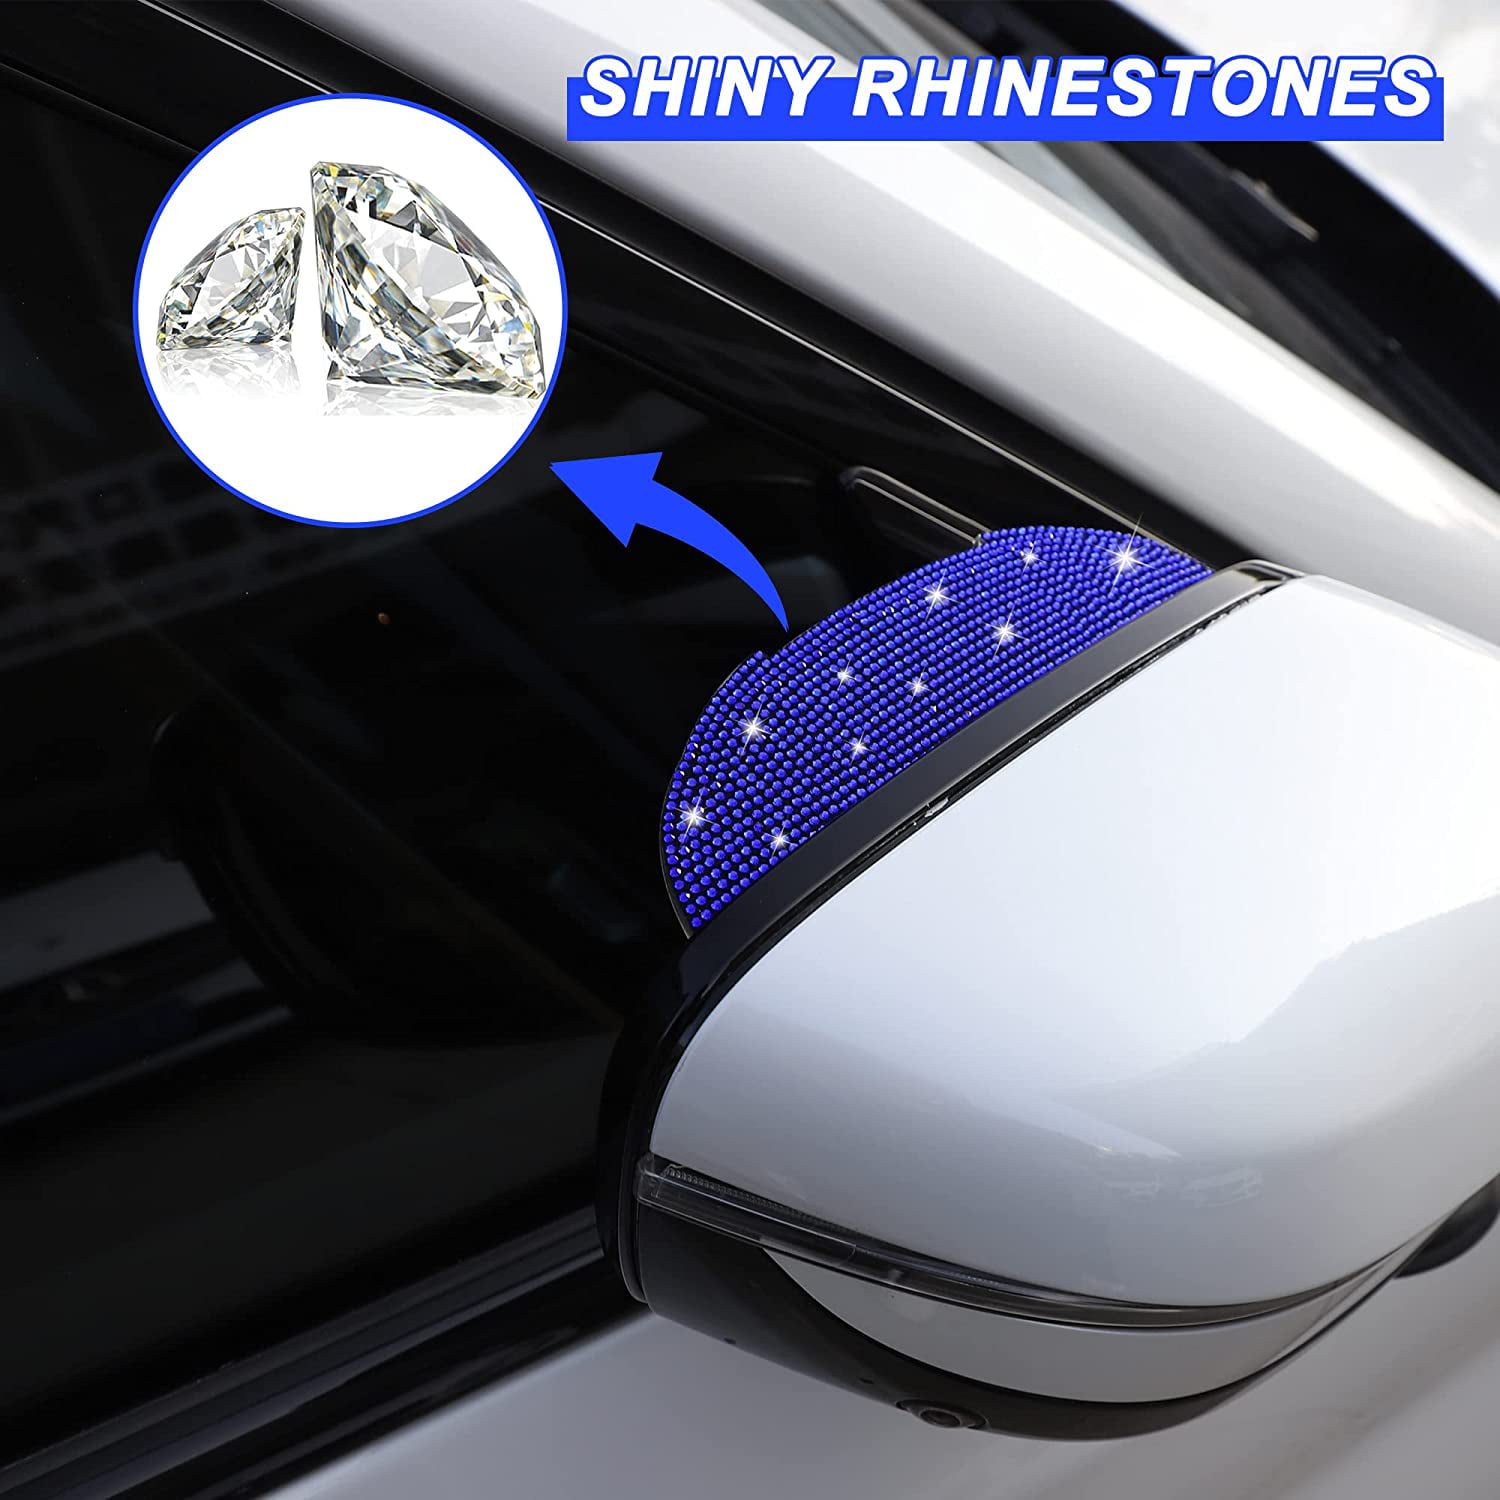  Pincuttee Mirror Rain Visor Eyebrow, Side Mirror Rain Guards,  Covers for Car Uniservial Fit 2 Pack : Automotive